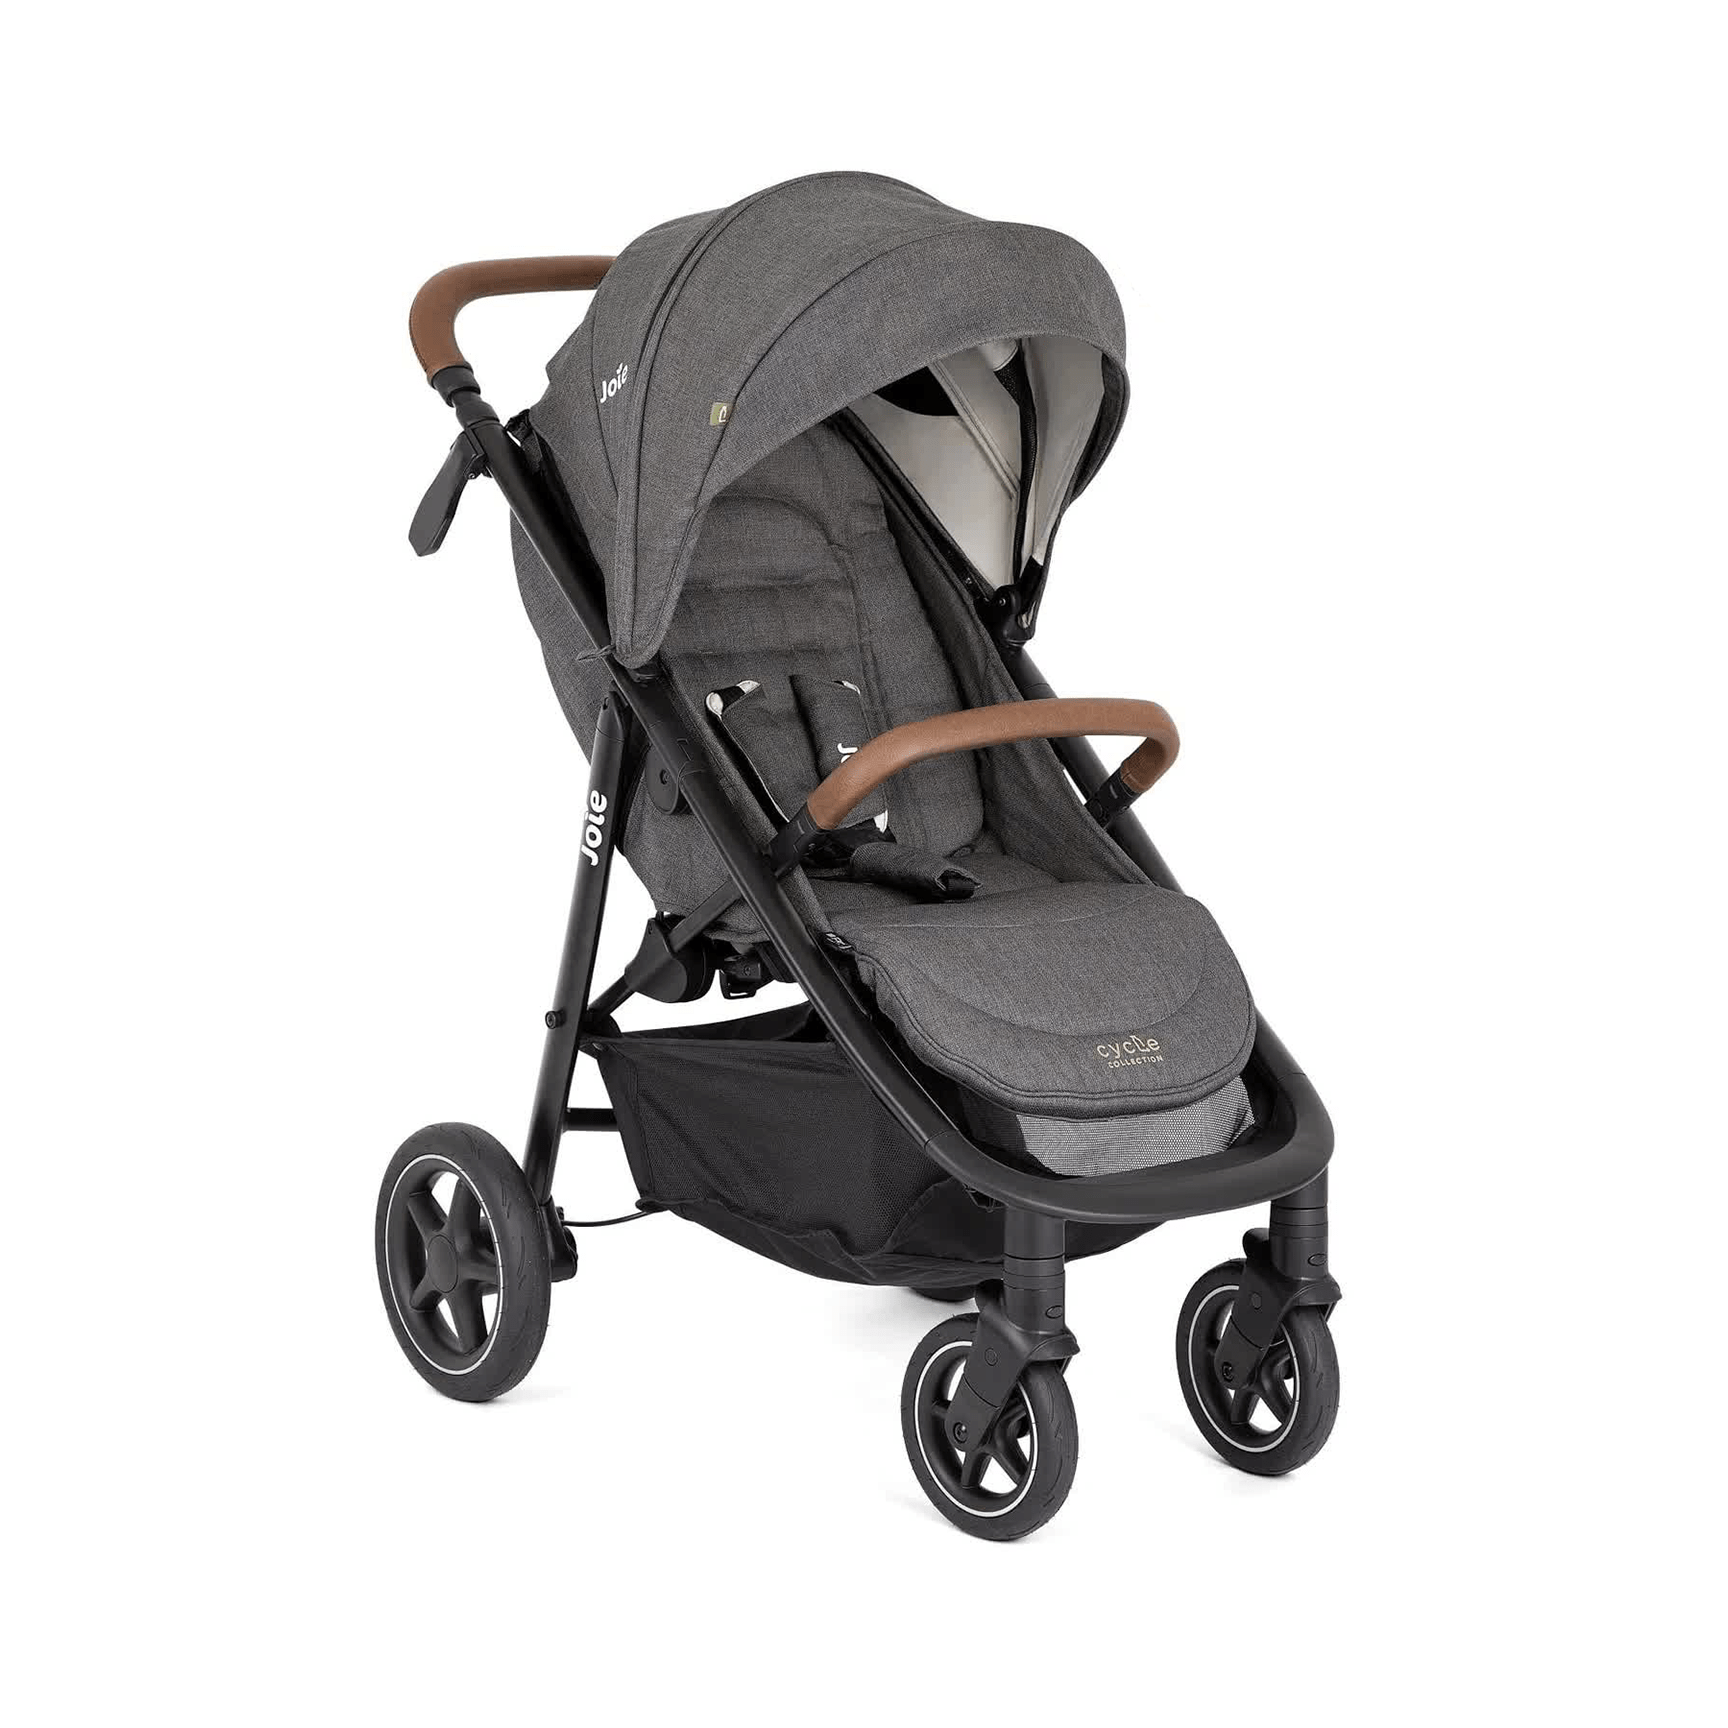 Joie Pushchairs & Buggies Joie Mytrax PRO Cycle - Shell grey S2208AACYC000